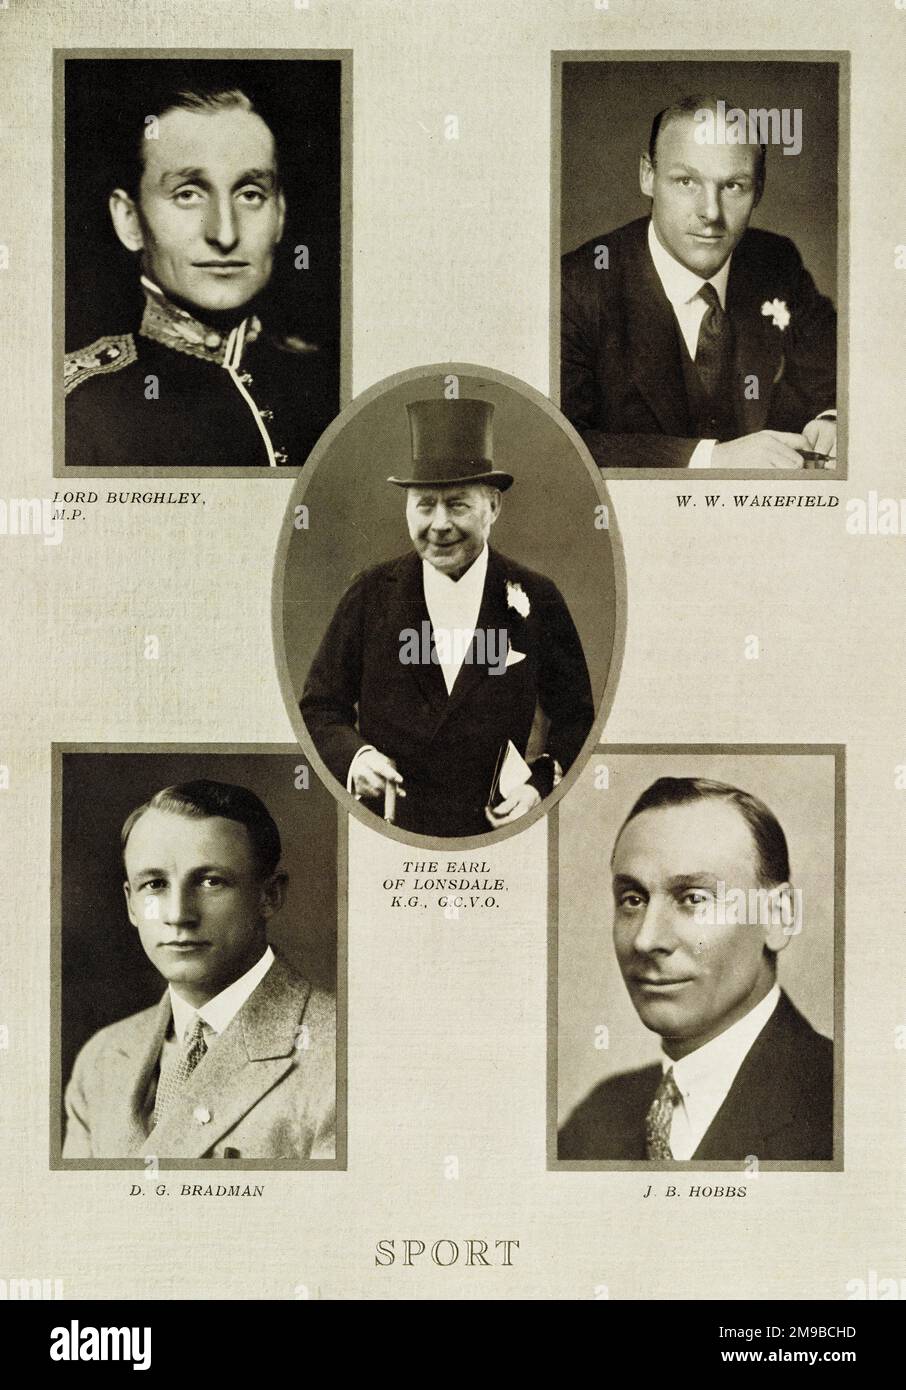 Sporting leaders during the first 25 years of the reign of King George V: Lord Burghley,  Wakefield, Earl of Lonsdale, Bradman, Hobbs. Stock Photo